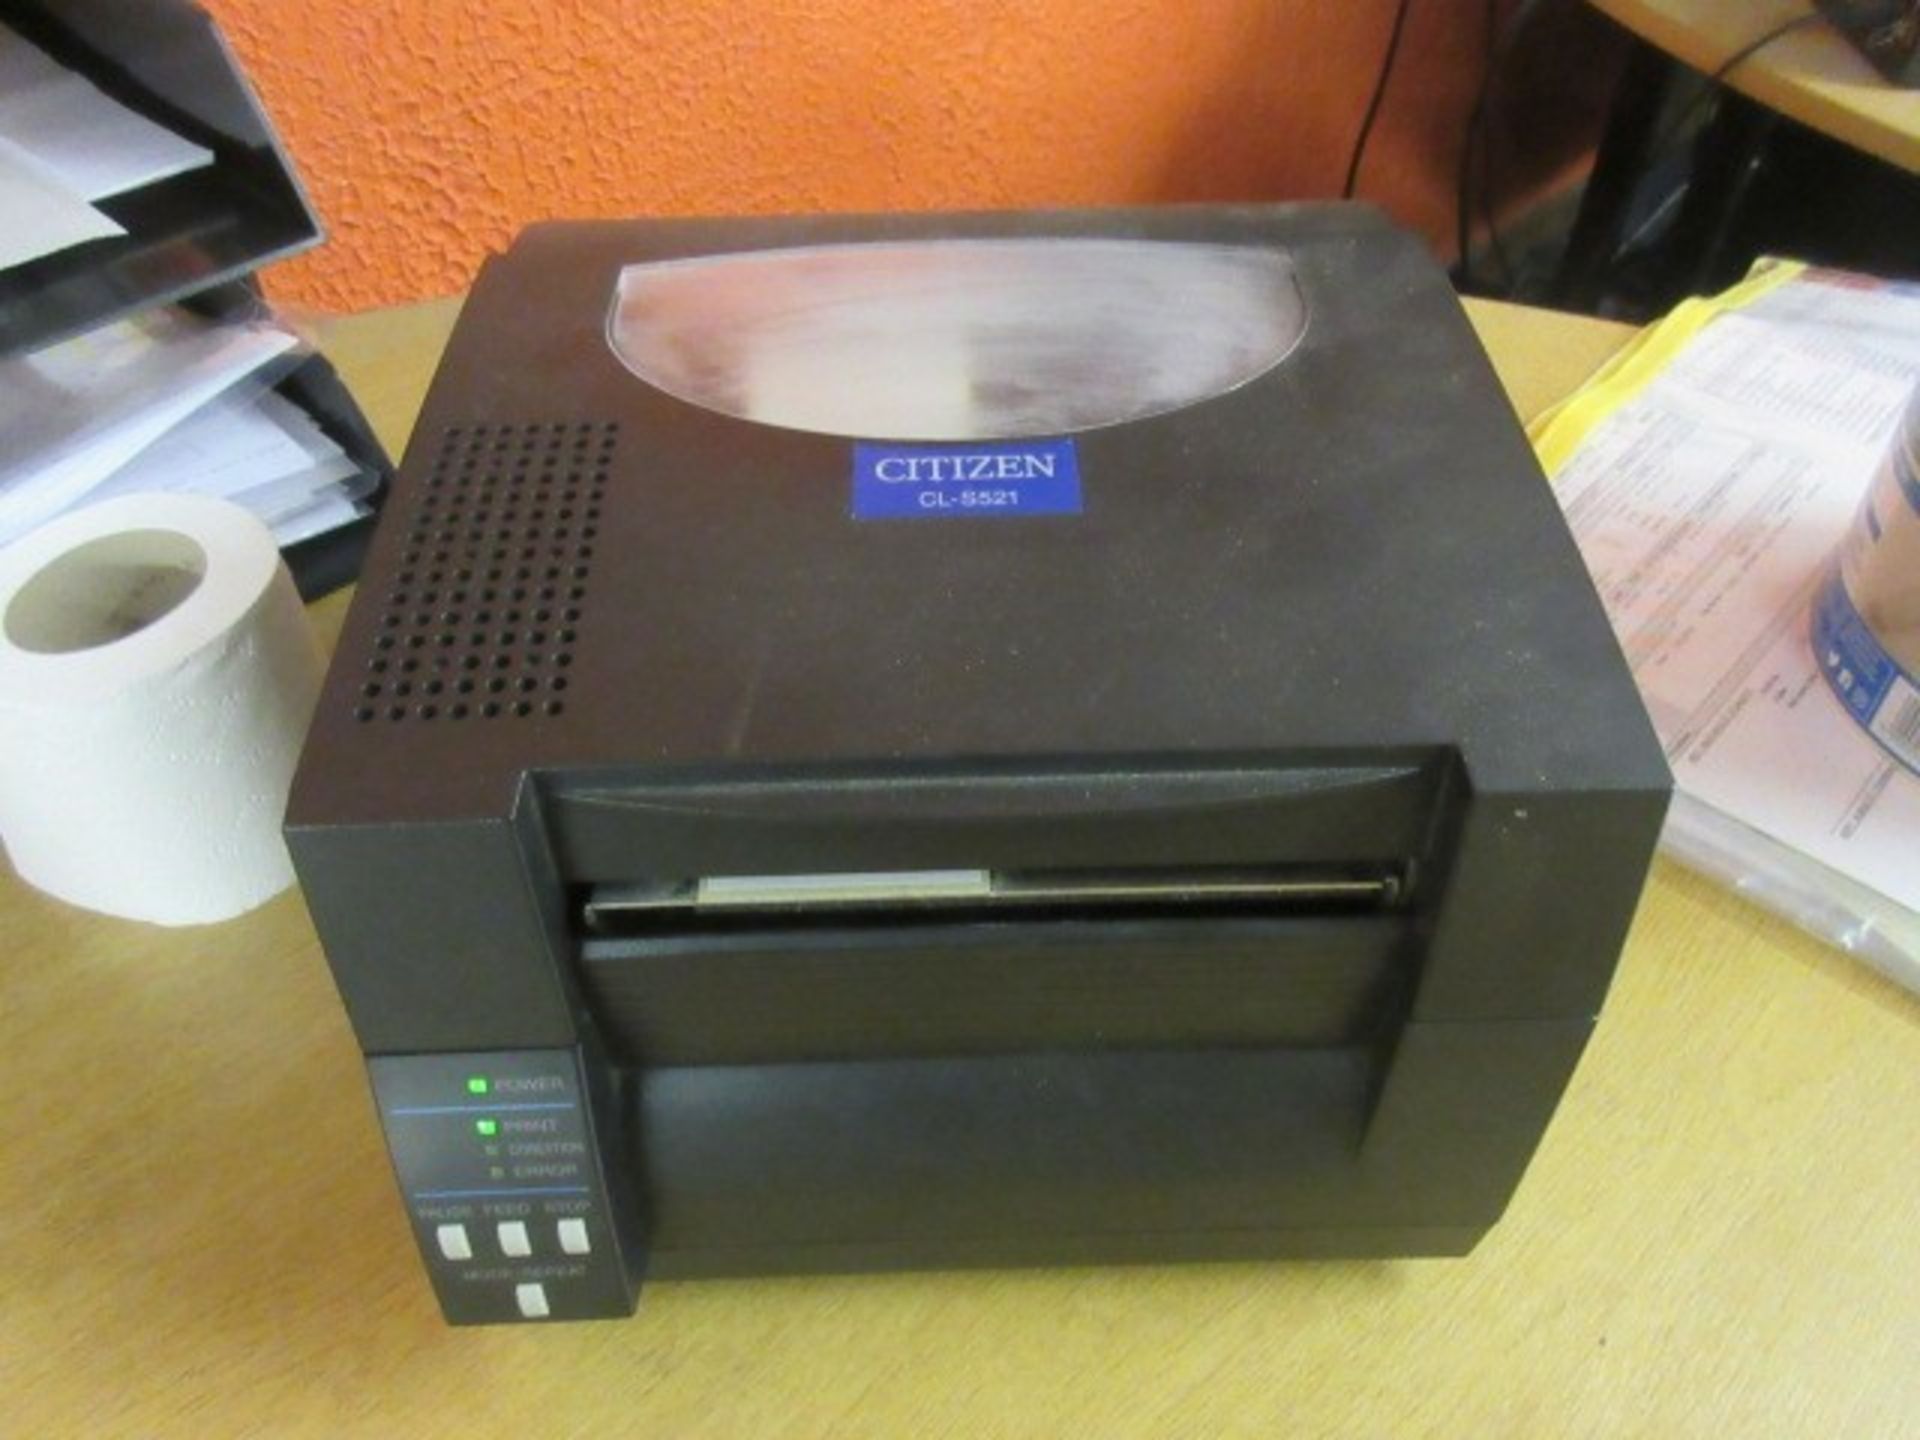 Citizen CL-S521 thermal label printer. - Image 3 of 4